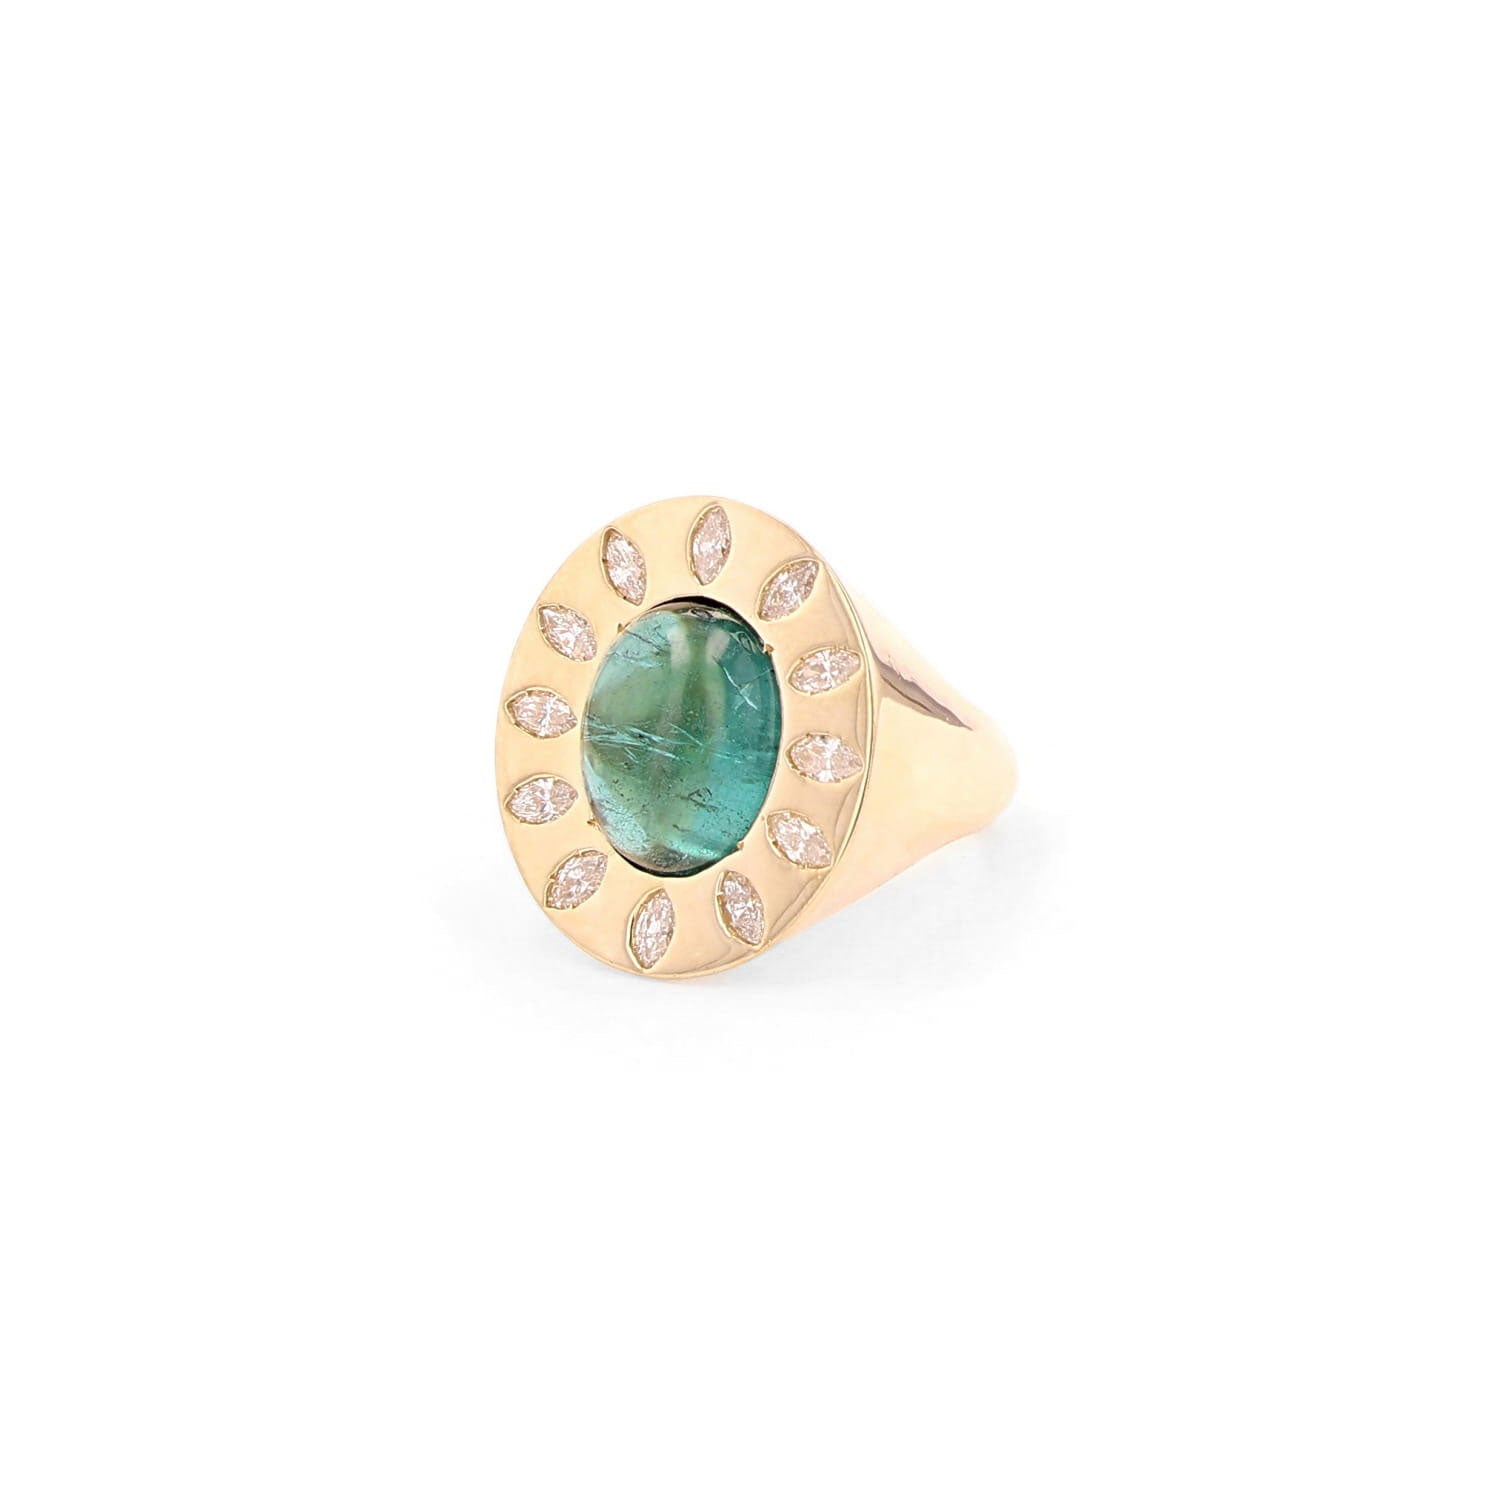 14k Teal Tourmaline Cabochon Ring with Marquis Diamond Flower  SRG058-8 - TBird